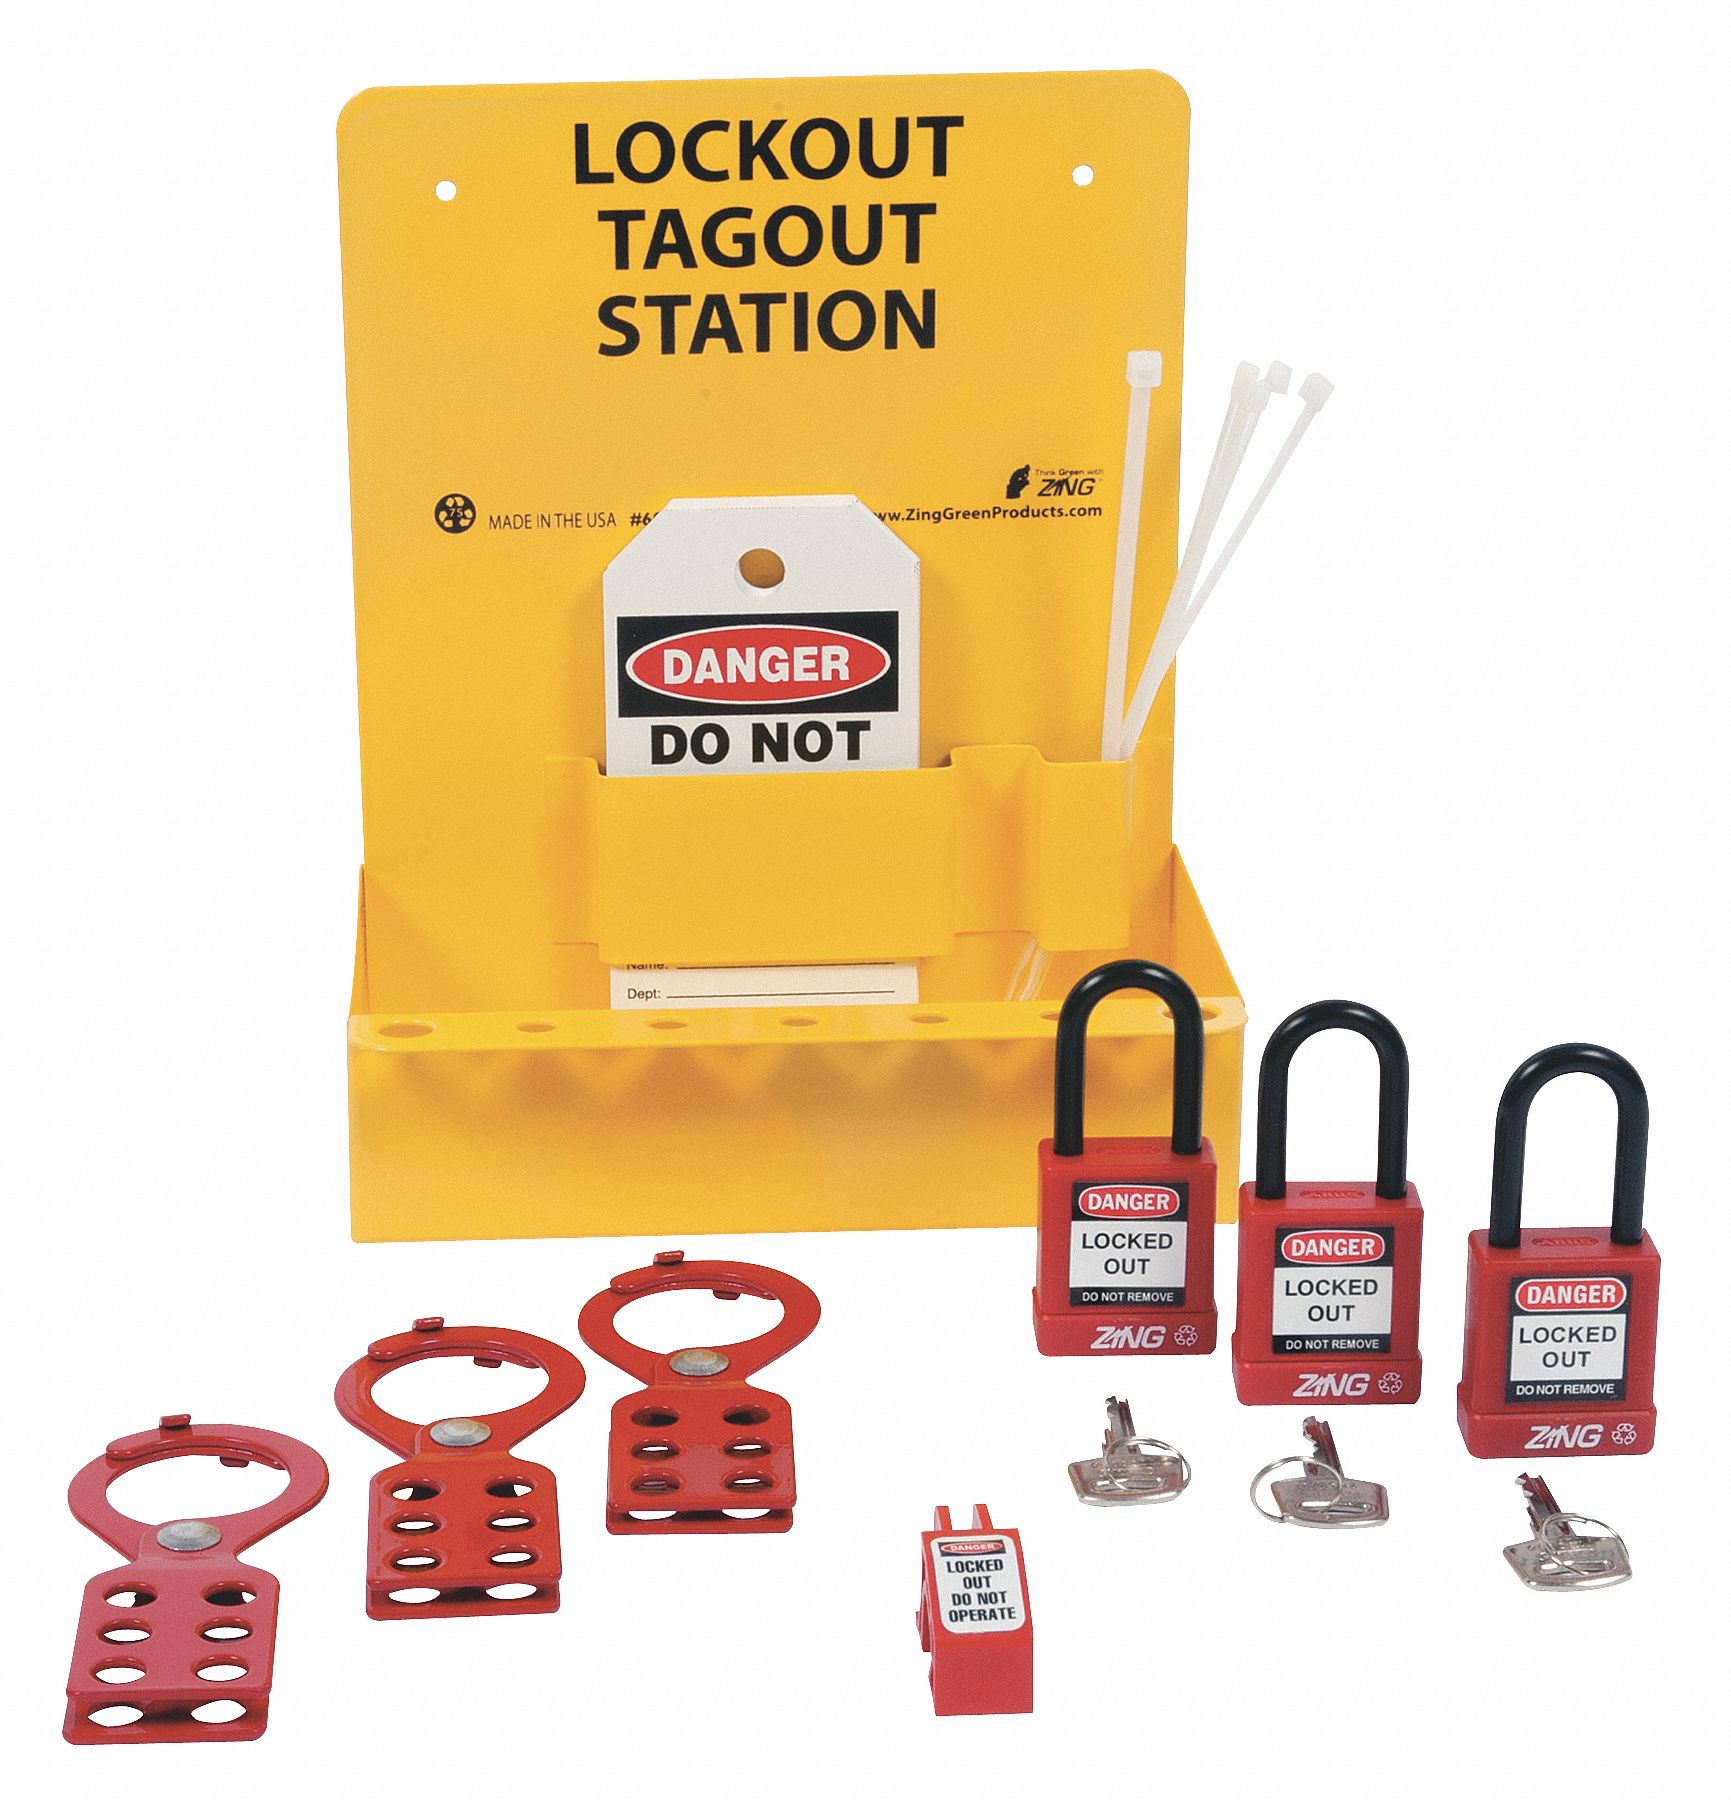 ZING Lockout Station: 17 Components Included, Electrical, Lockout Station,  Keyed Different Padlocks